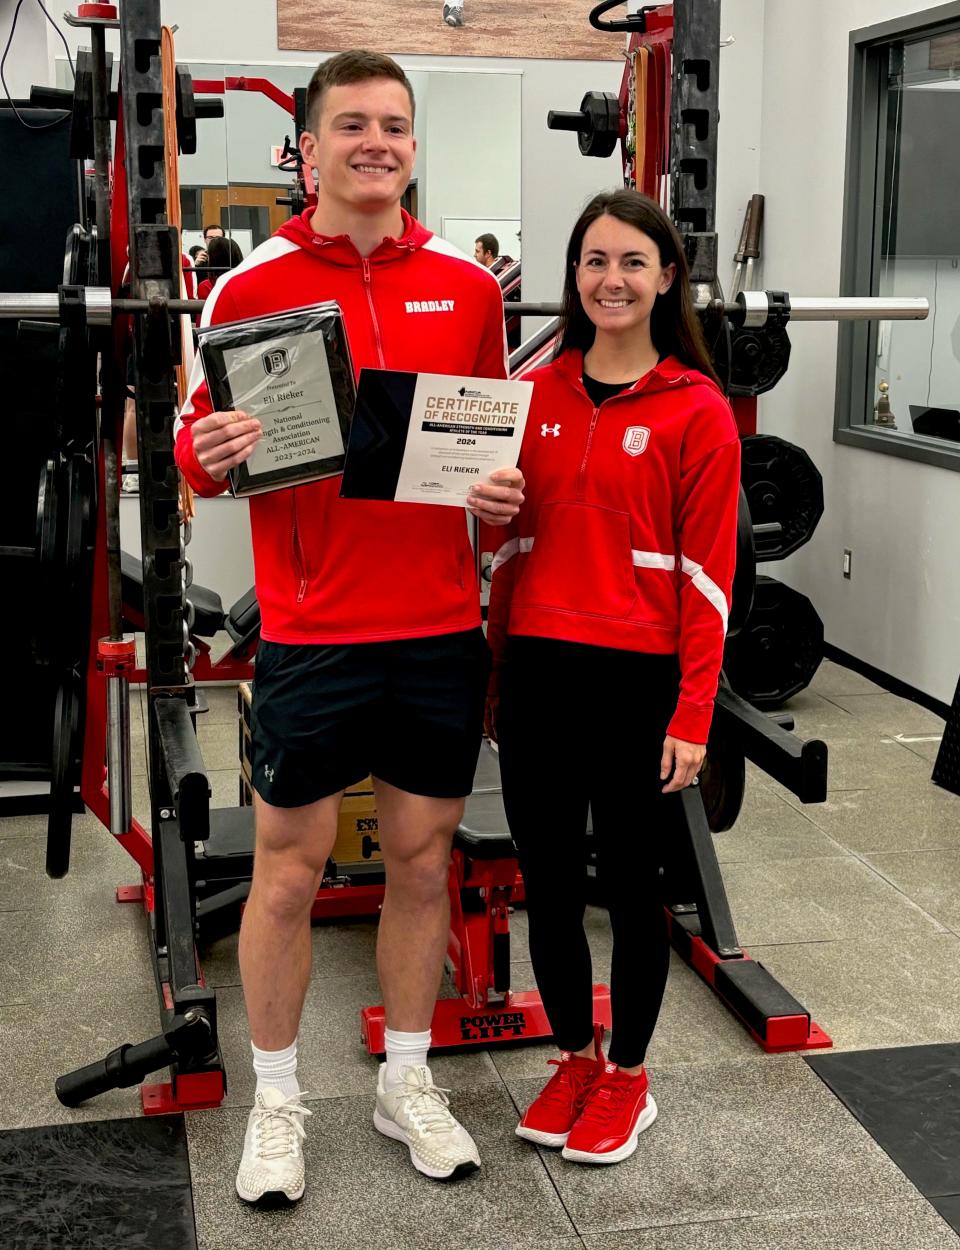 Bradley University track and field star Eli Rieker celebrates his national training recognition with BU associate director of sports performance Josie Jay.